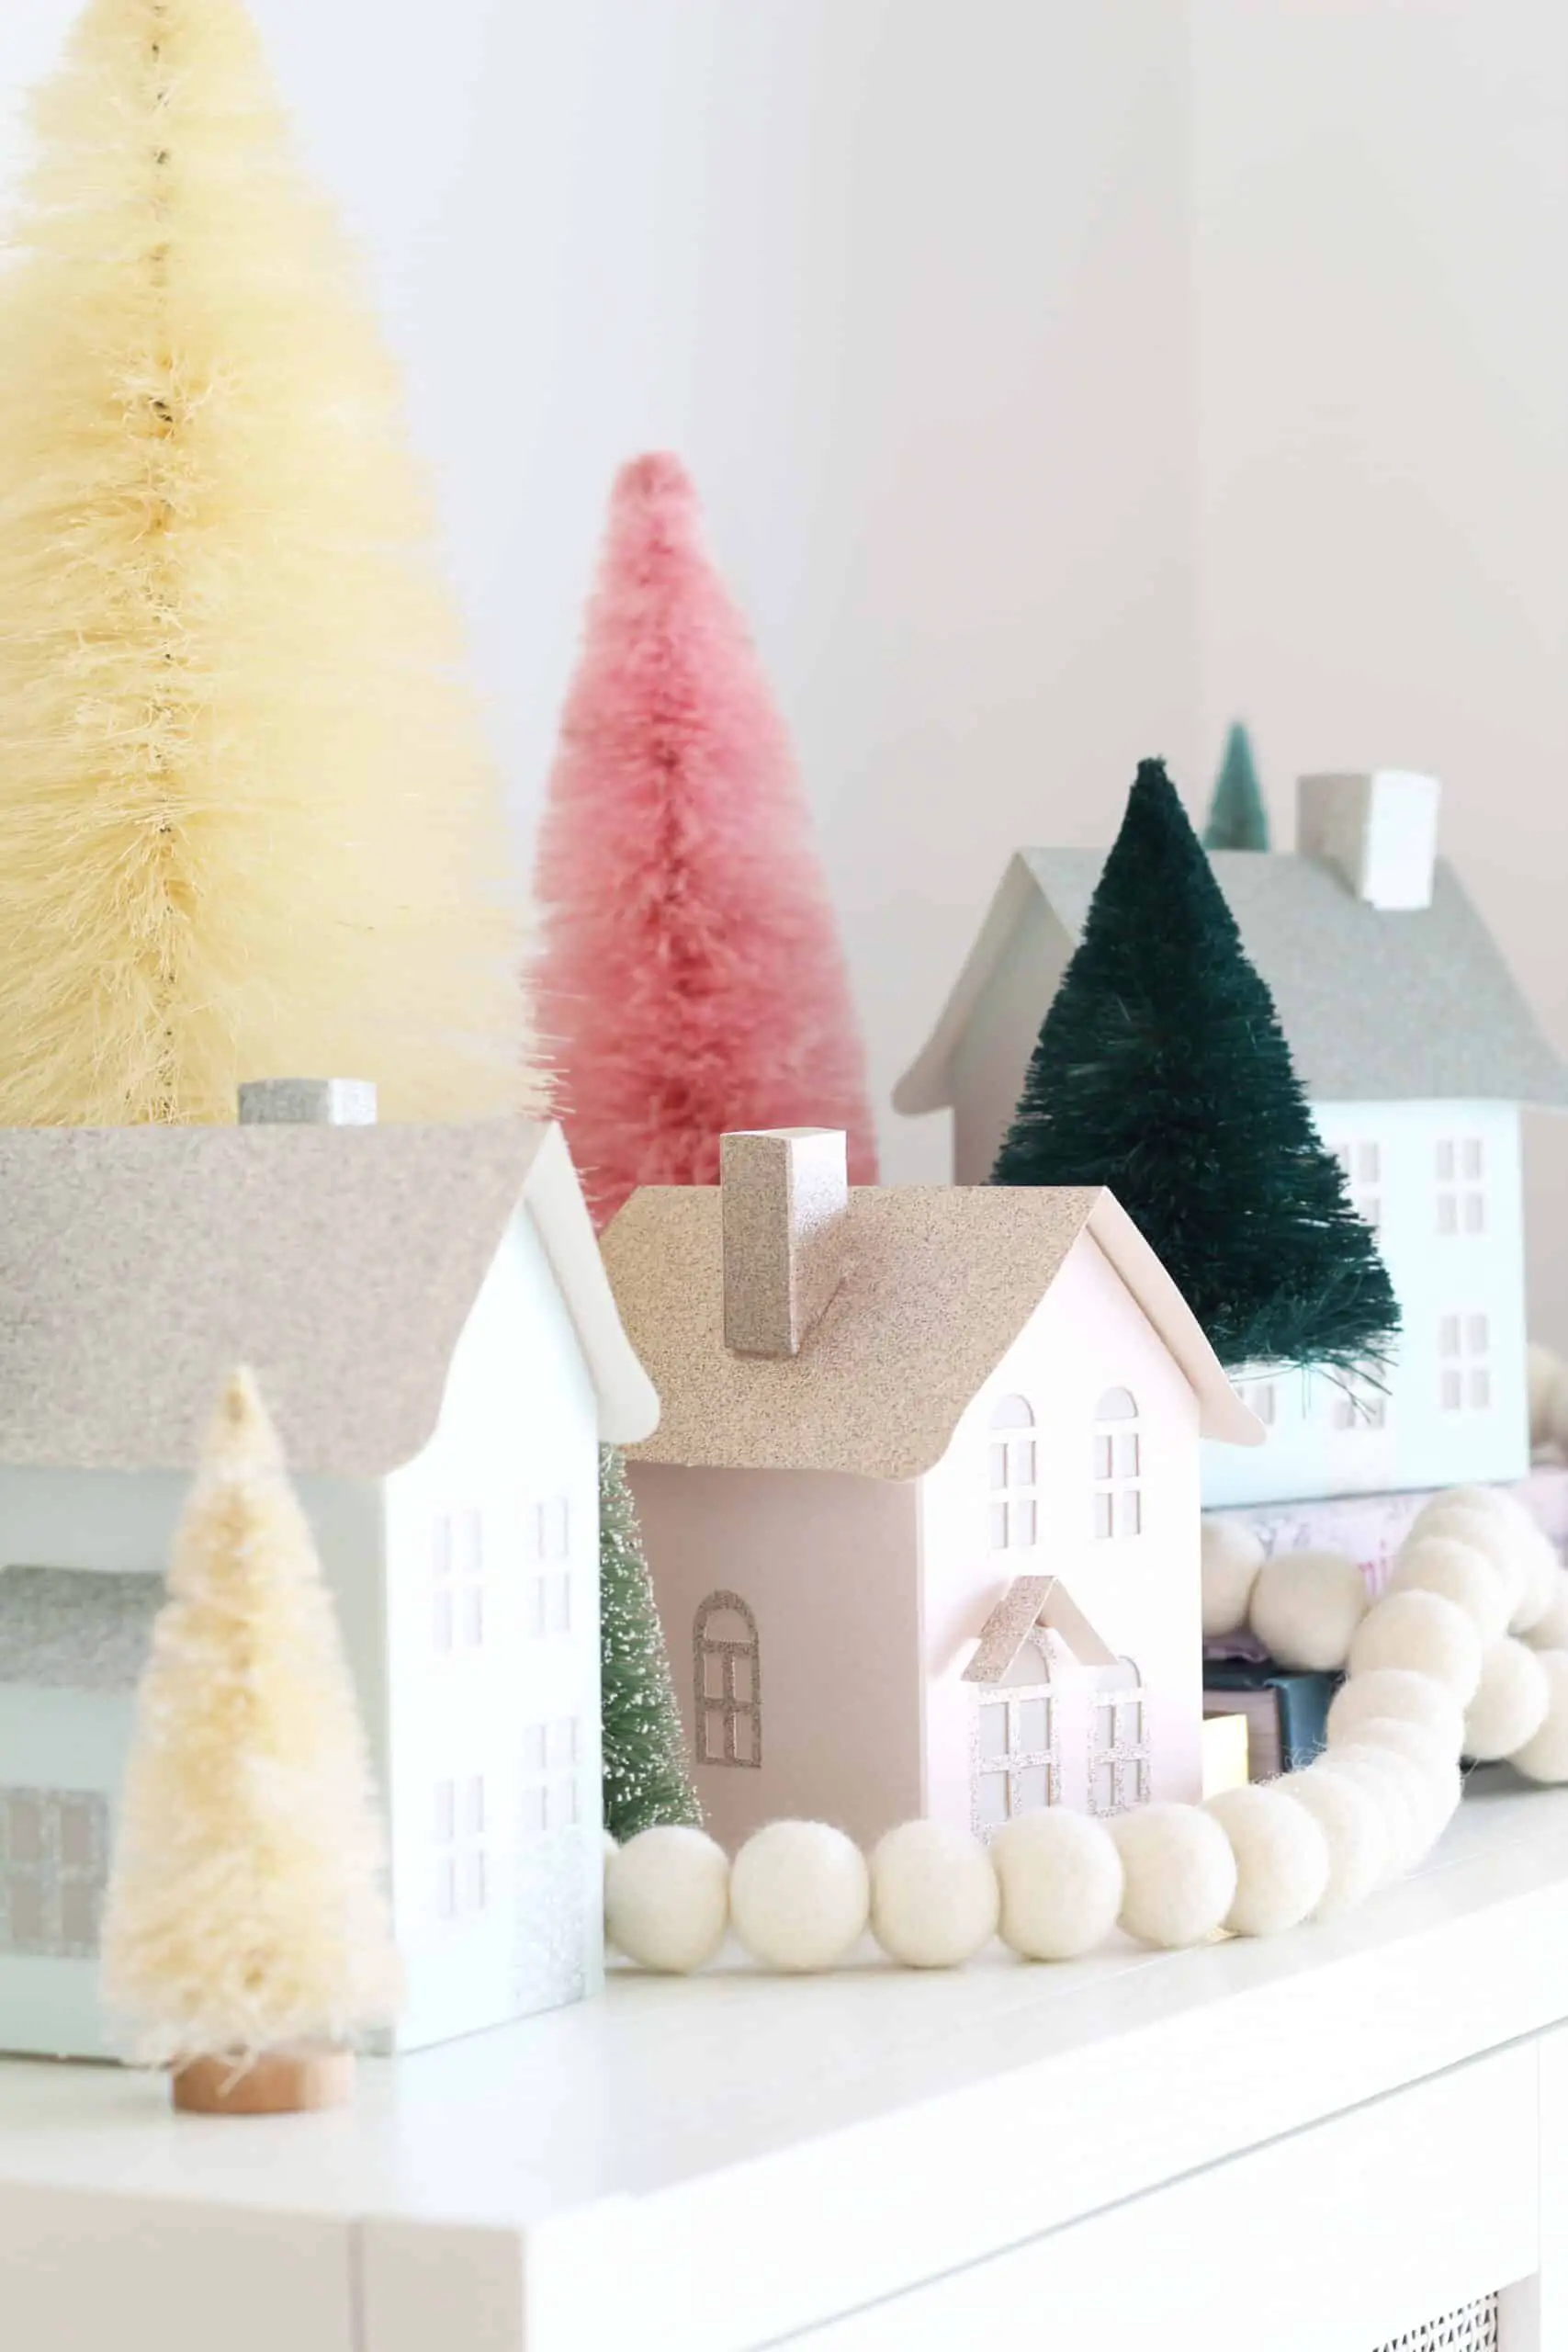 paper putz houses in pastel colors with colorful bottle brush trees